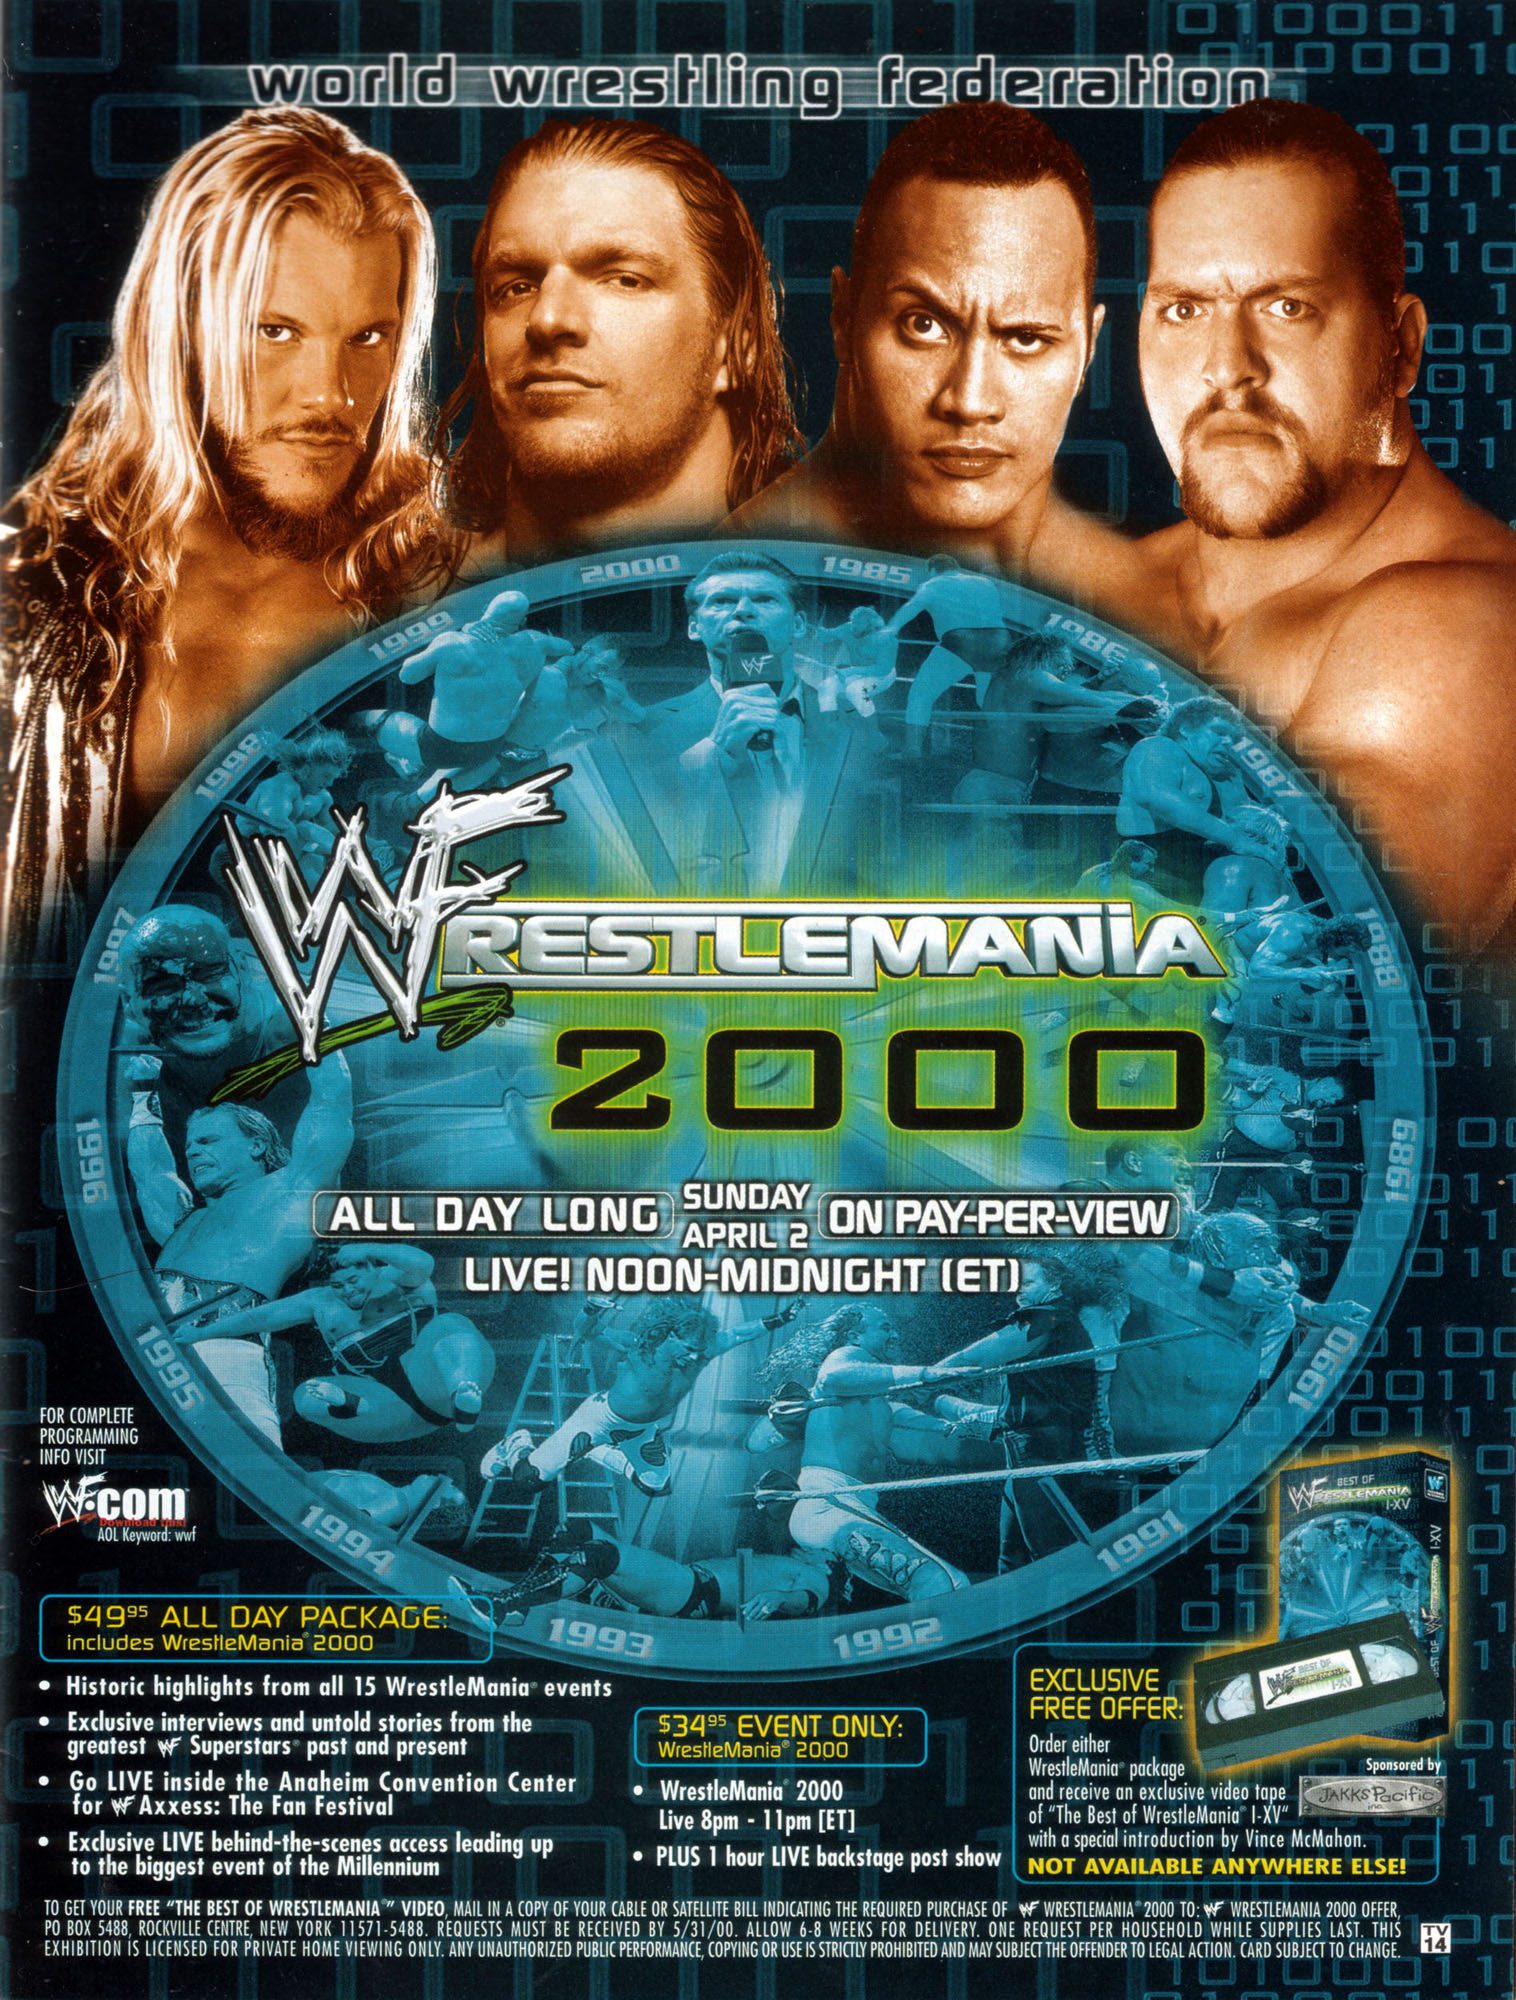 Chris Jericho On The WWF WrestleMania 16 Poster Main Event 2000